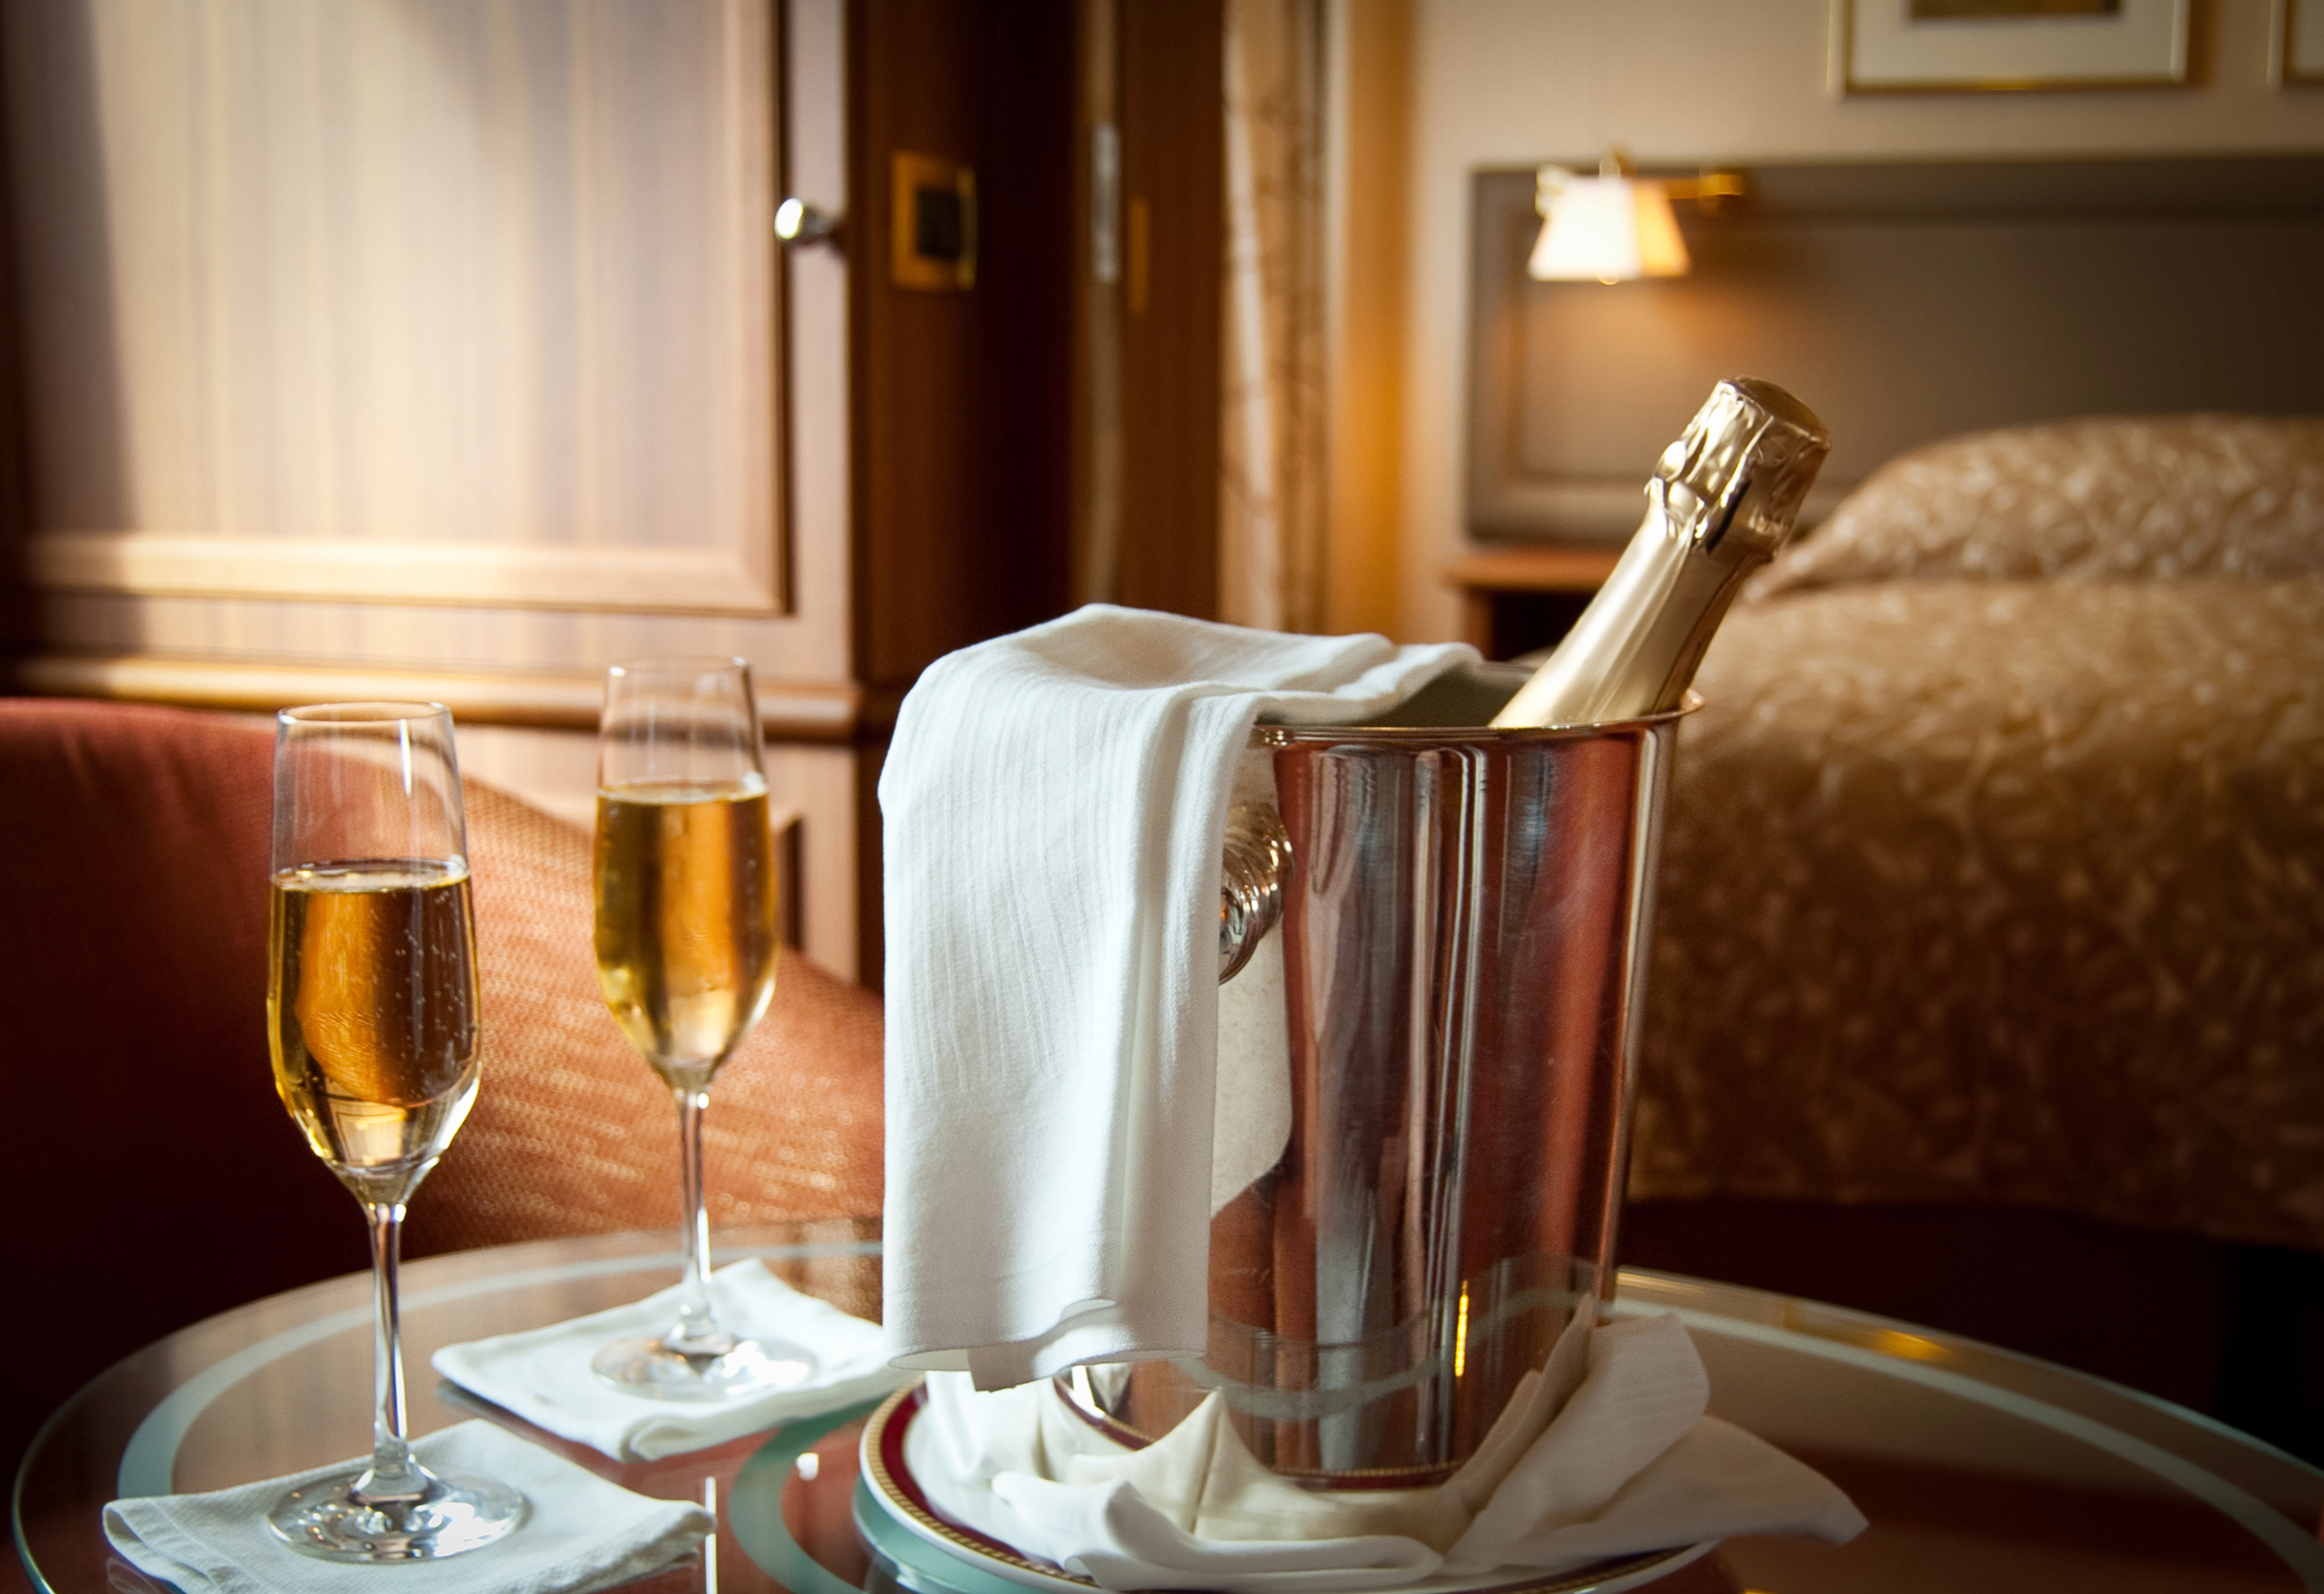 Two flutes of champagne with a bottle in an ice bucket, set on a luxury room service tray